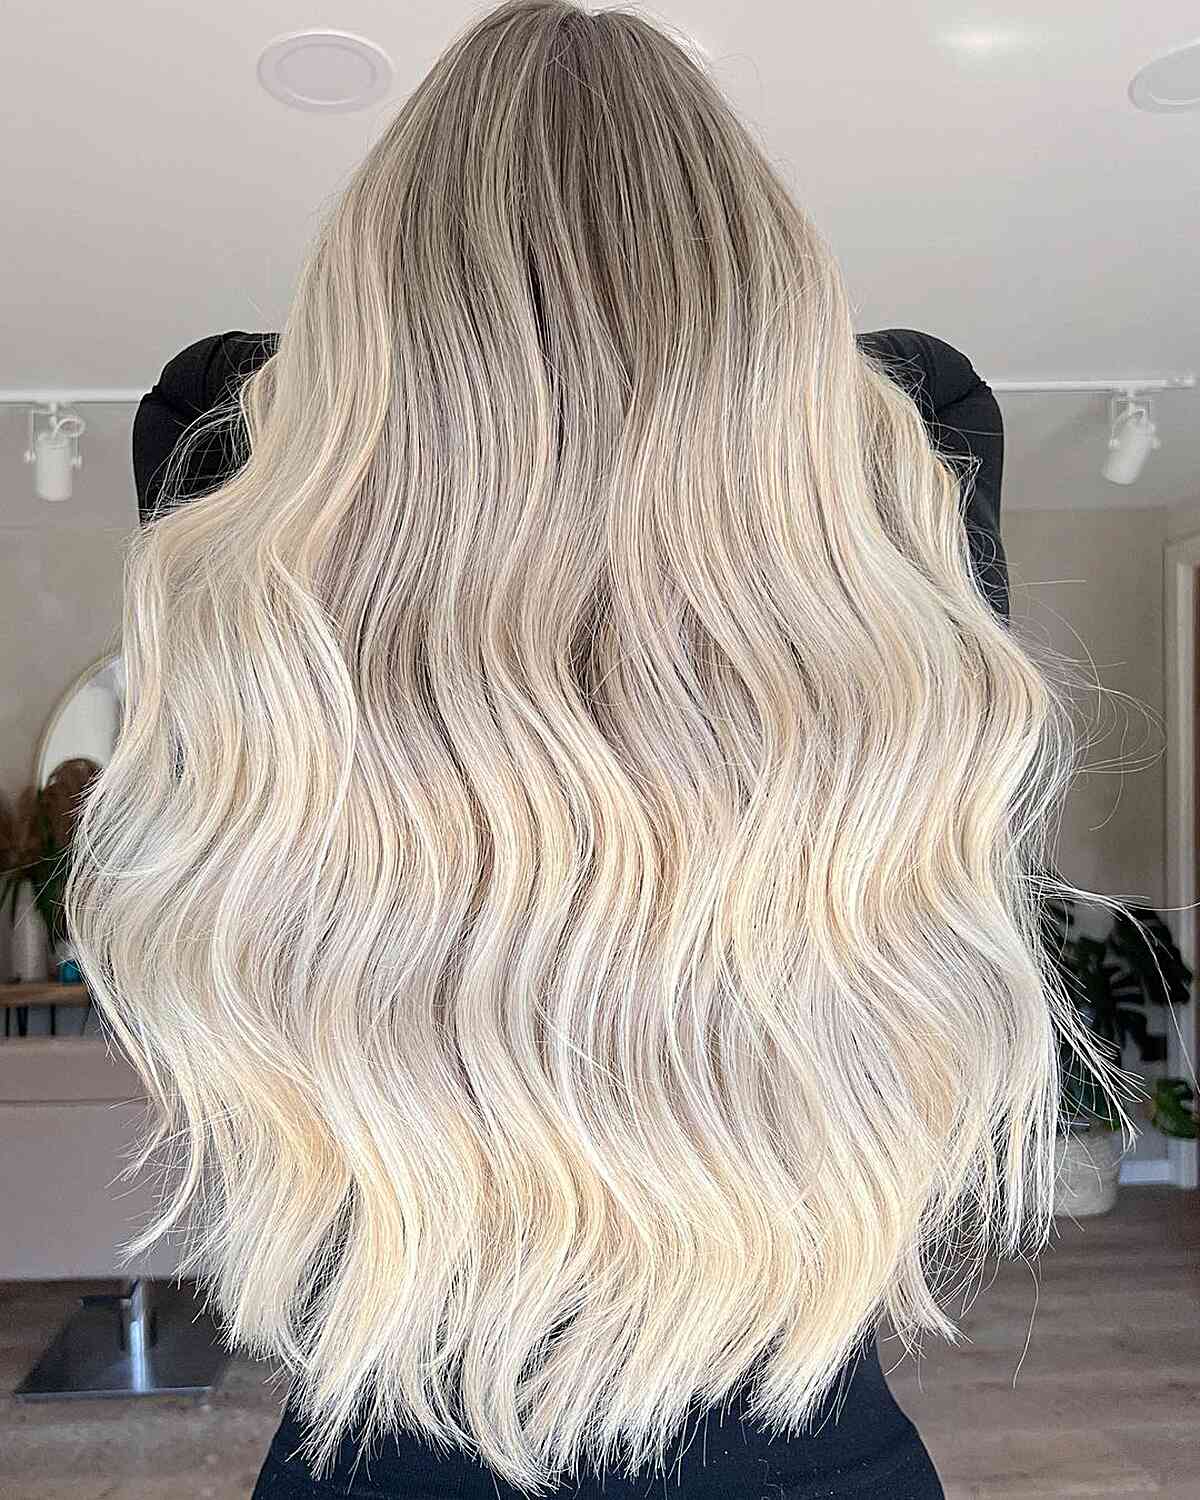 Rooted White Blonde Hair with Bright Ends